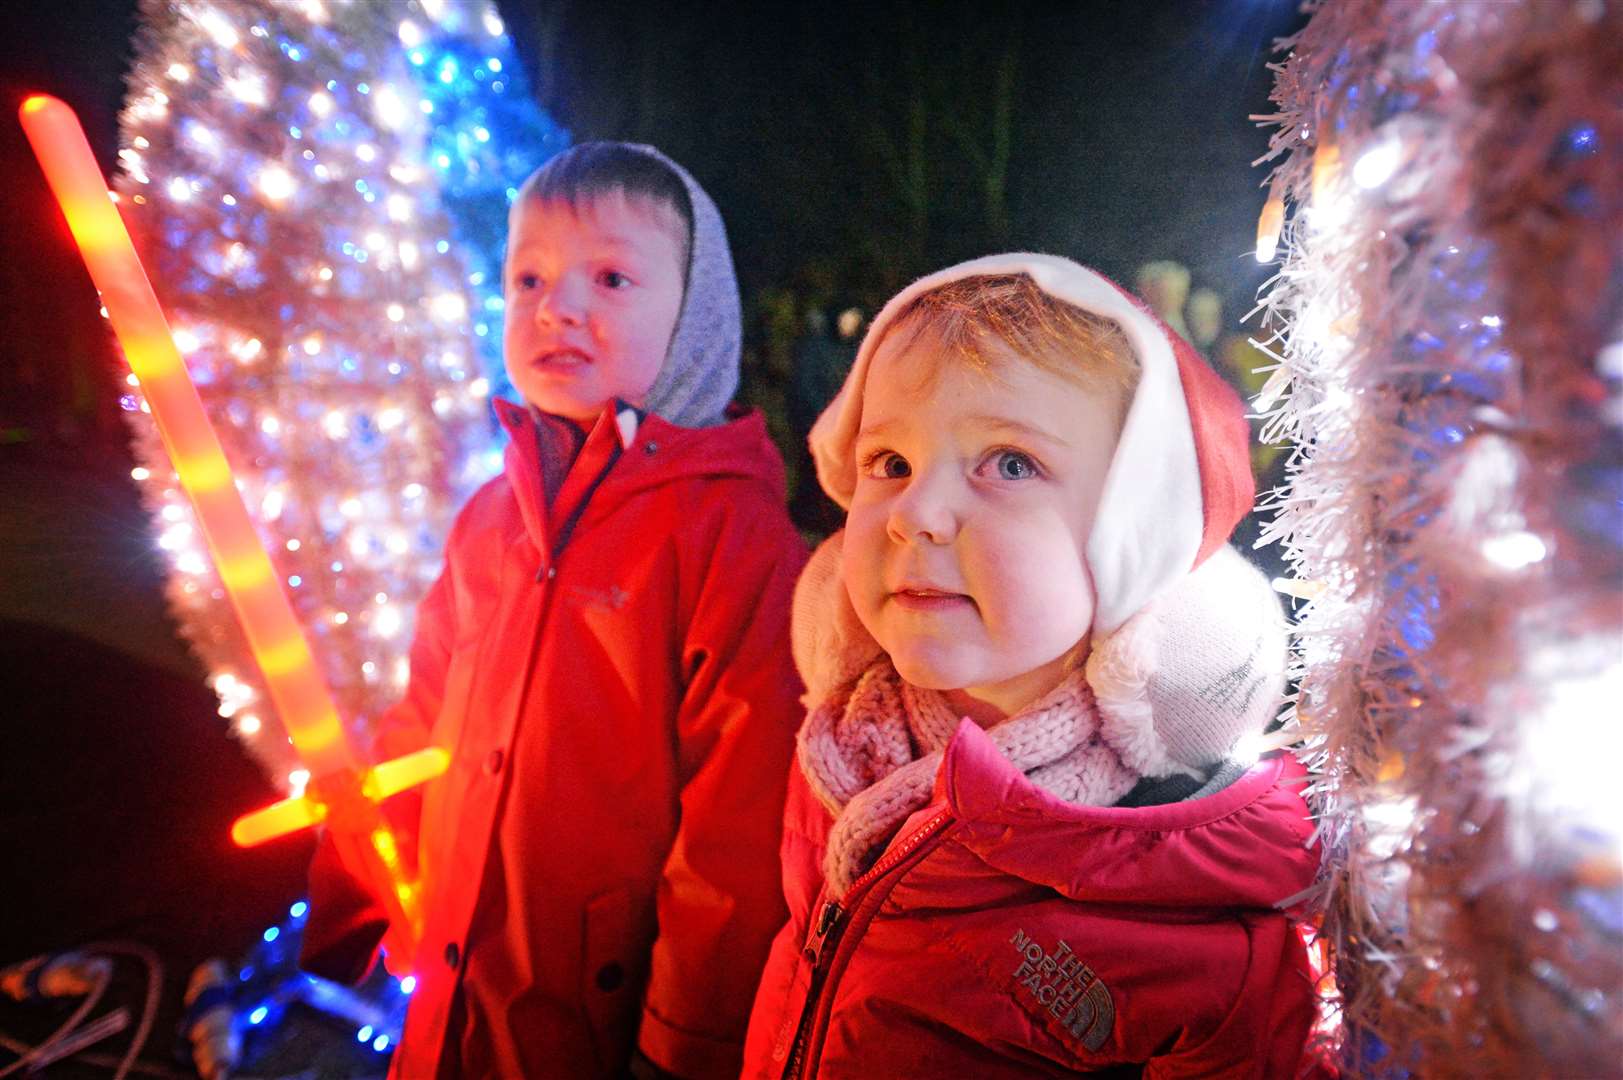 Fraser Mill and Sadie Smith enjoyed exploring the lights. Picture: Gair Fraser.